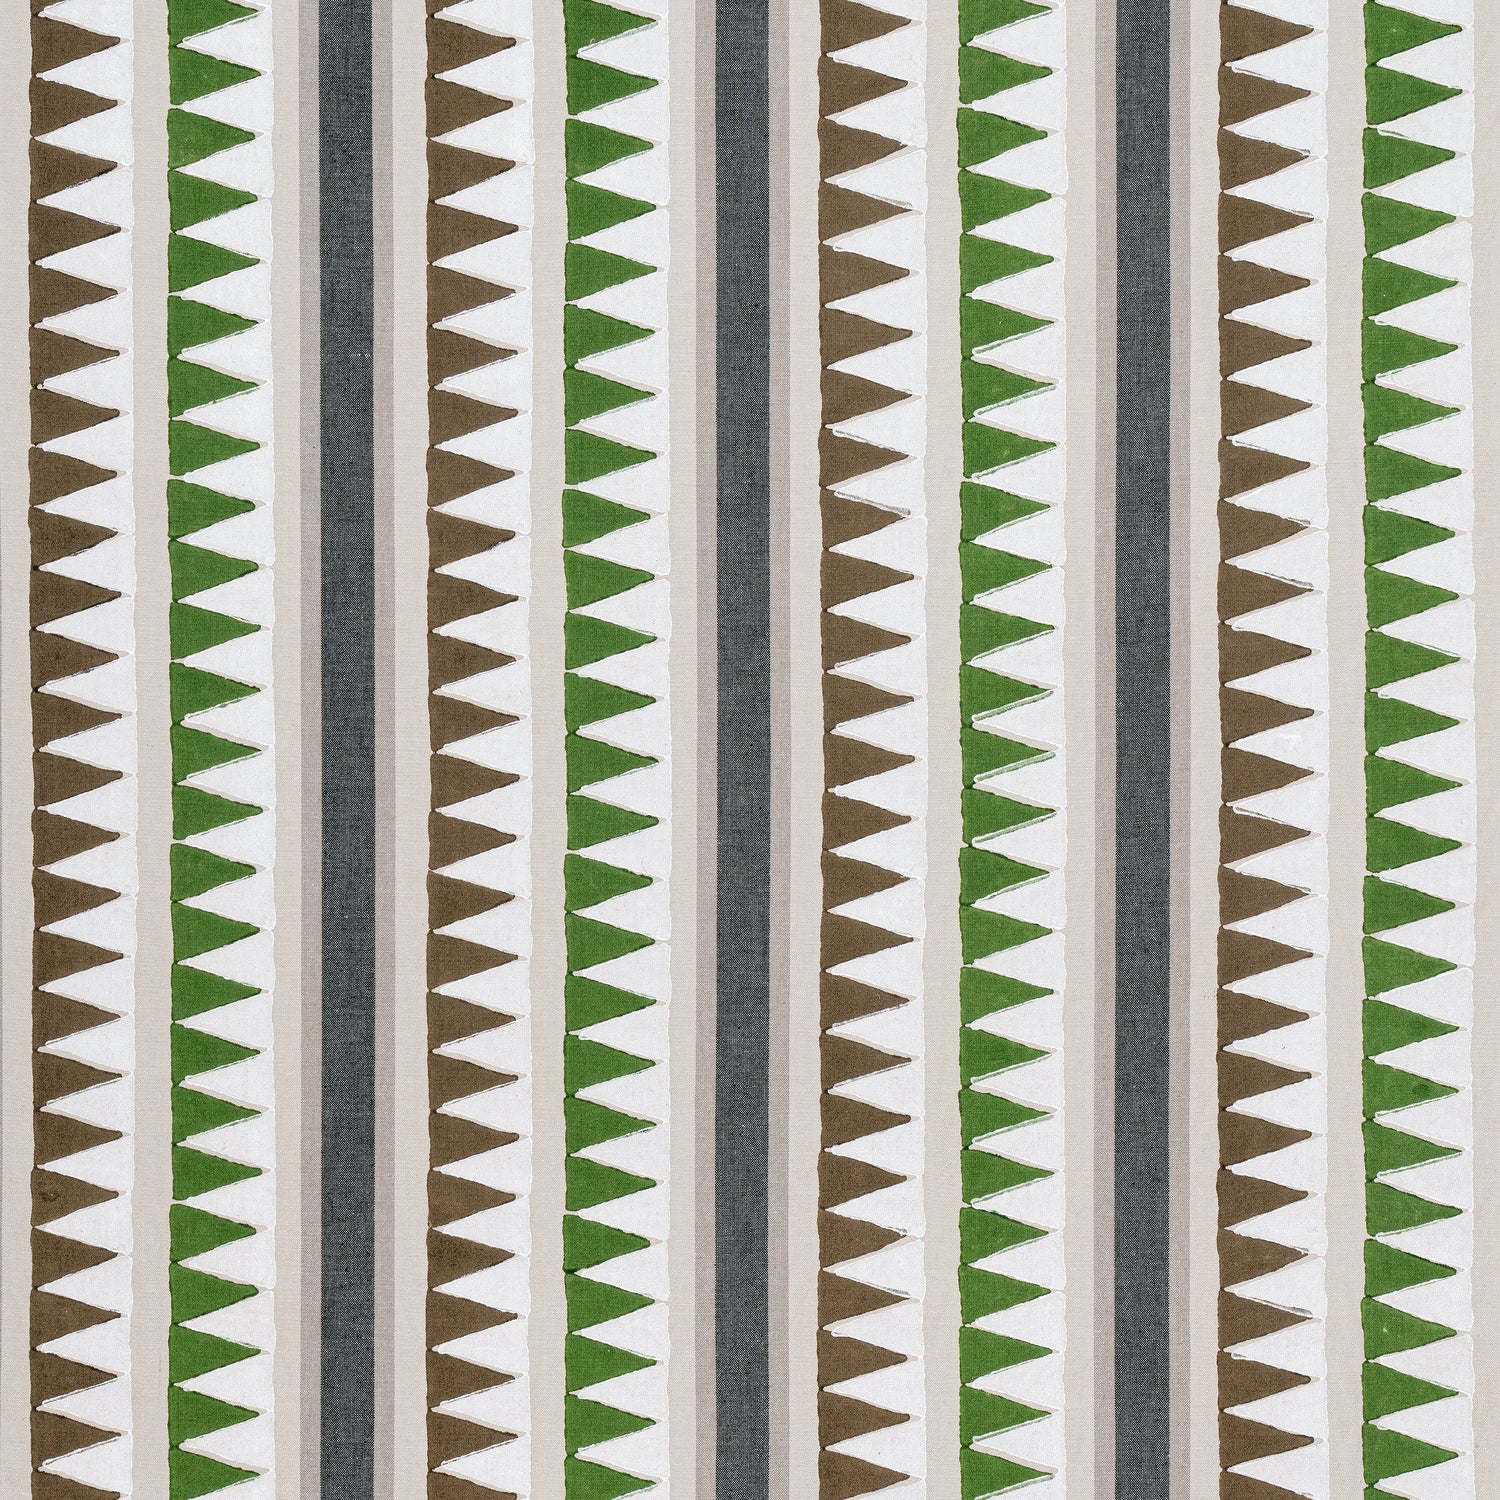 Lomita Stripe fabric in black and green color - pattern number F916235 - by Thibaut in the Kismet collection